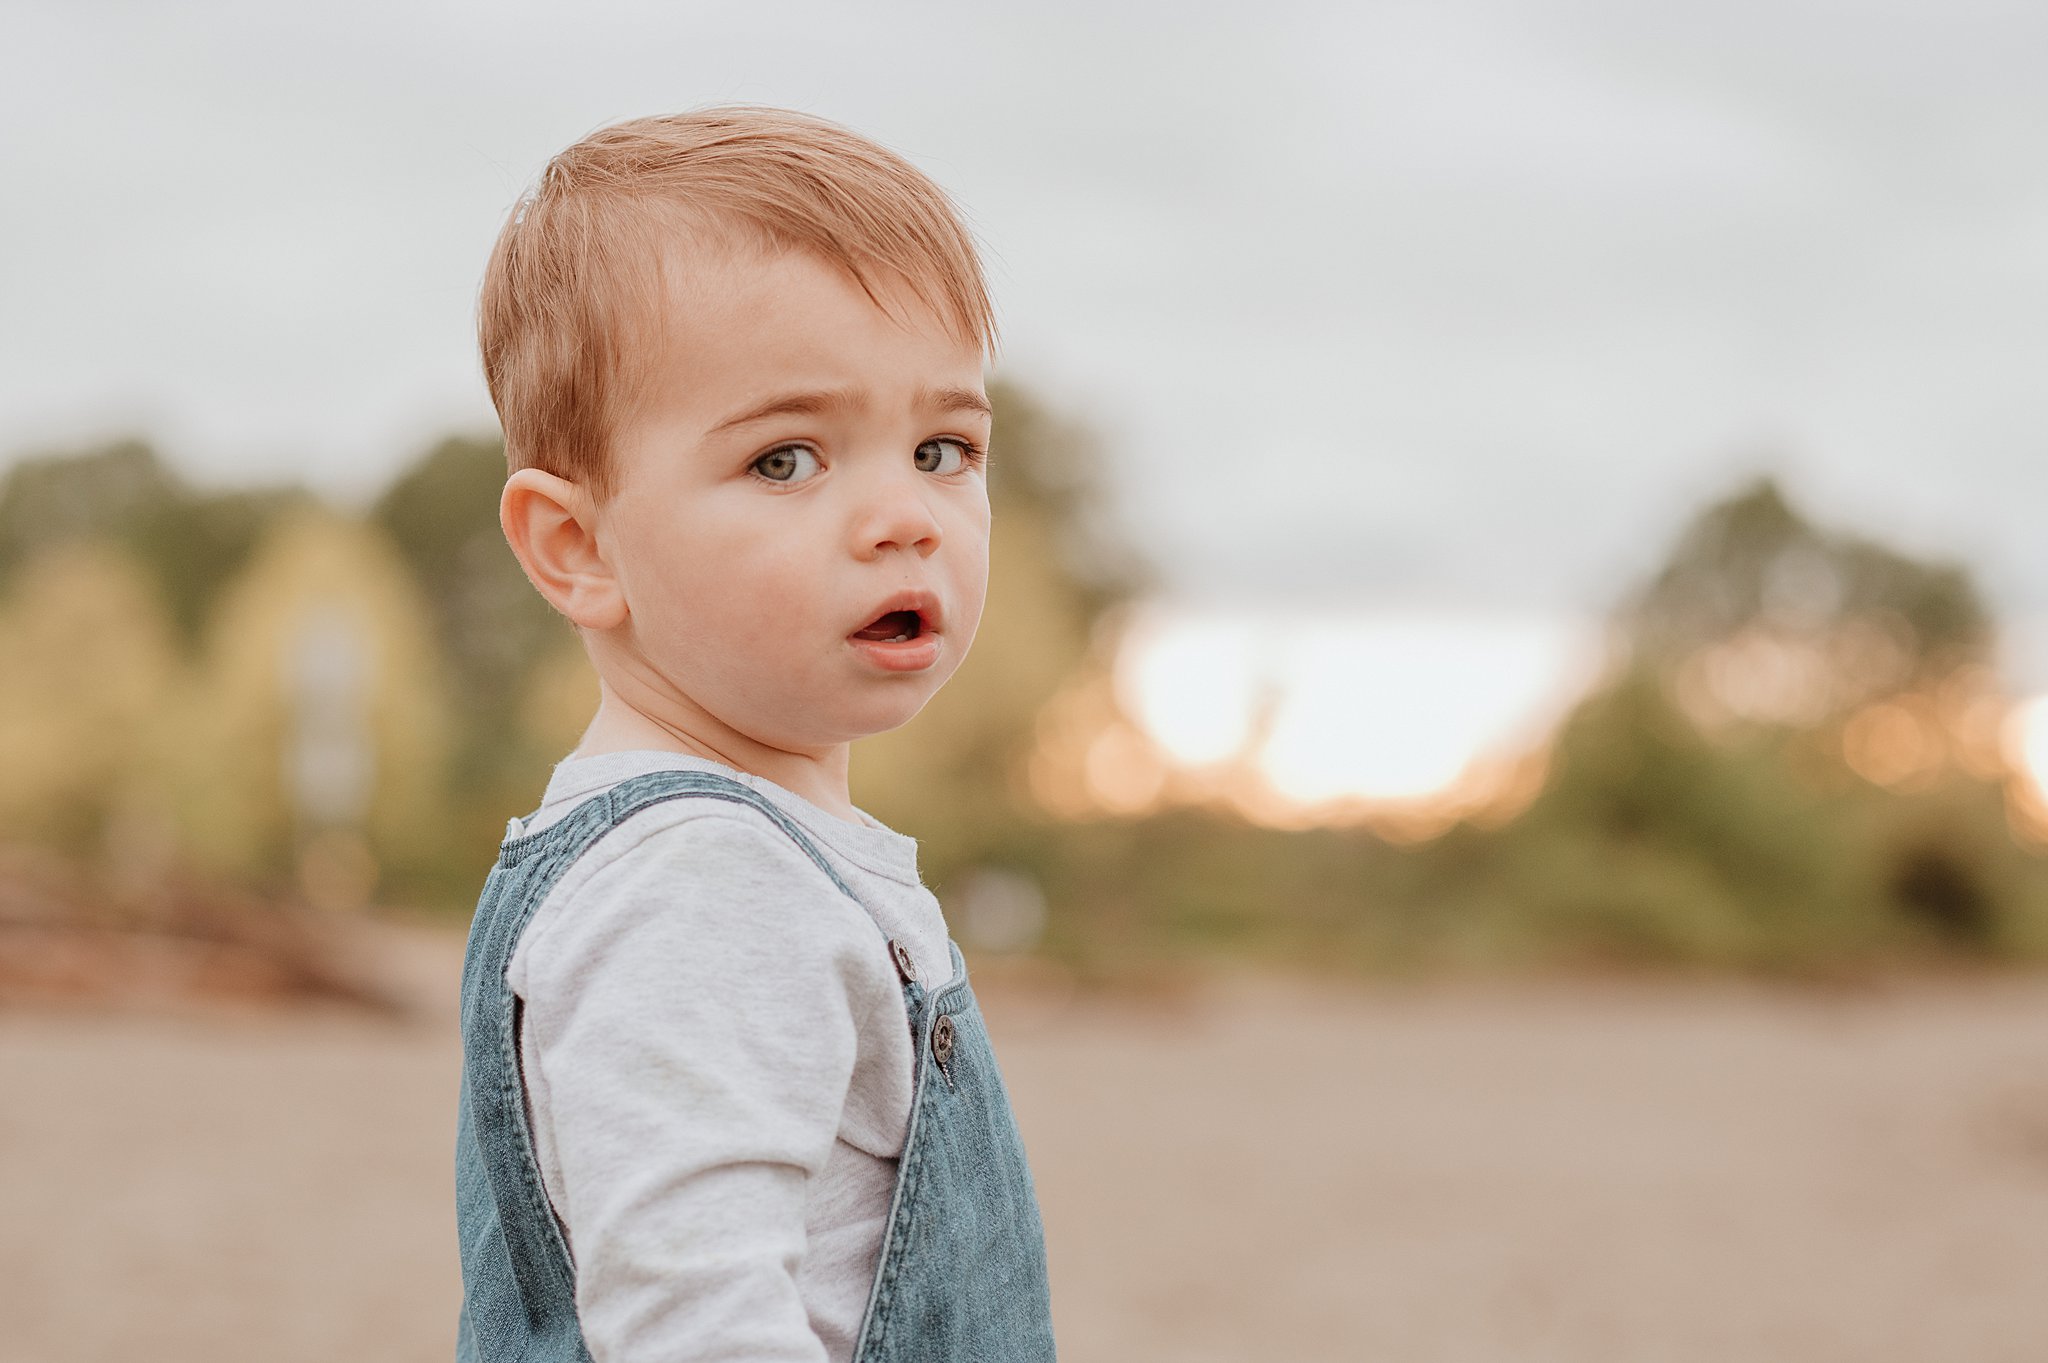 A toddler boy in denim overalls stands on a beach at sunset